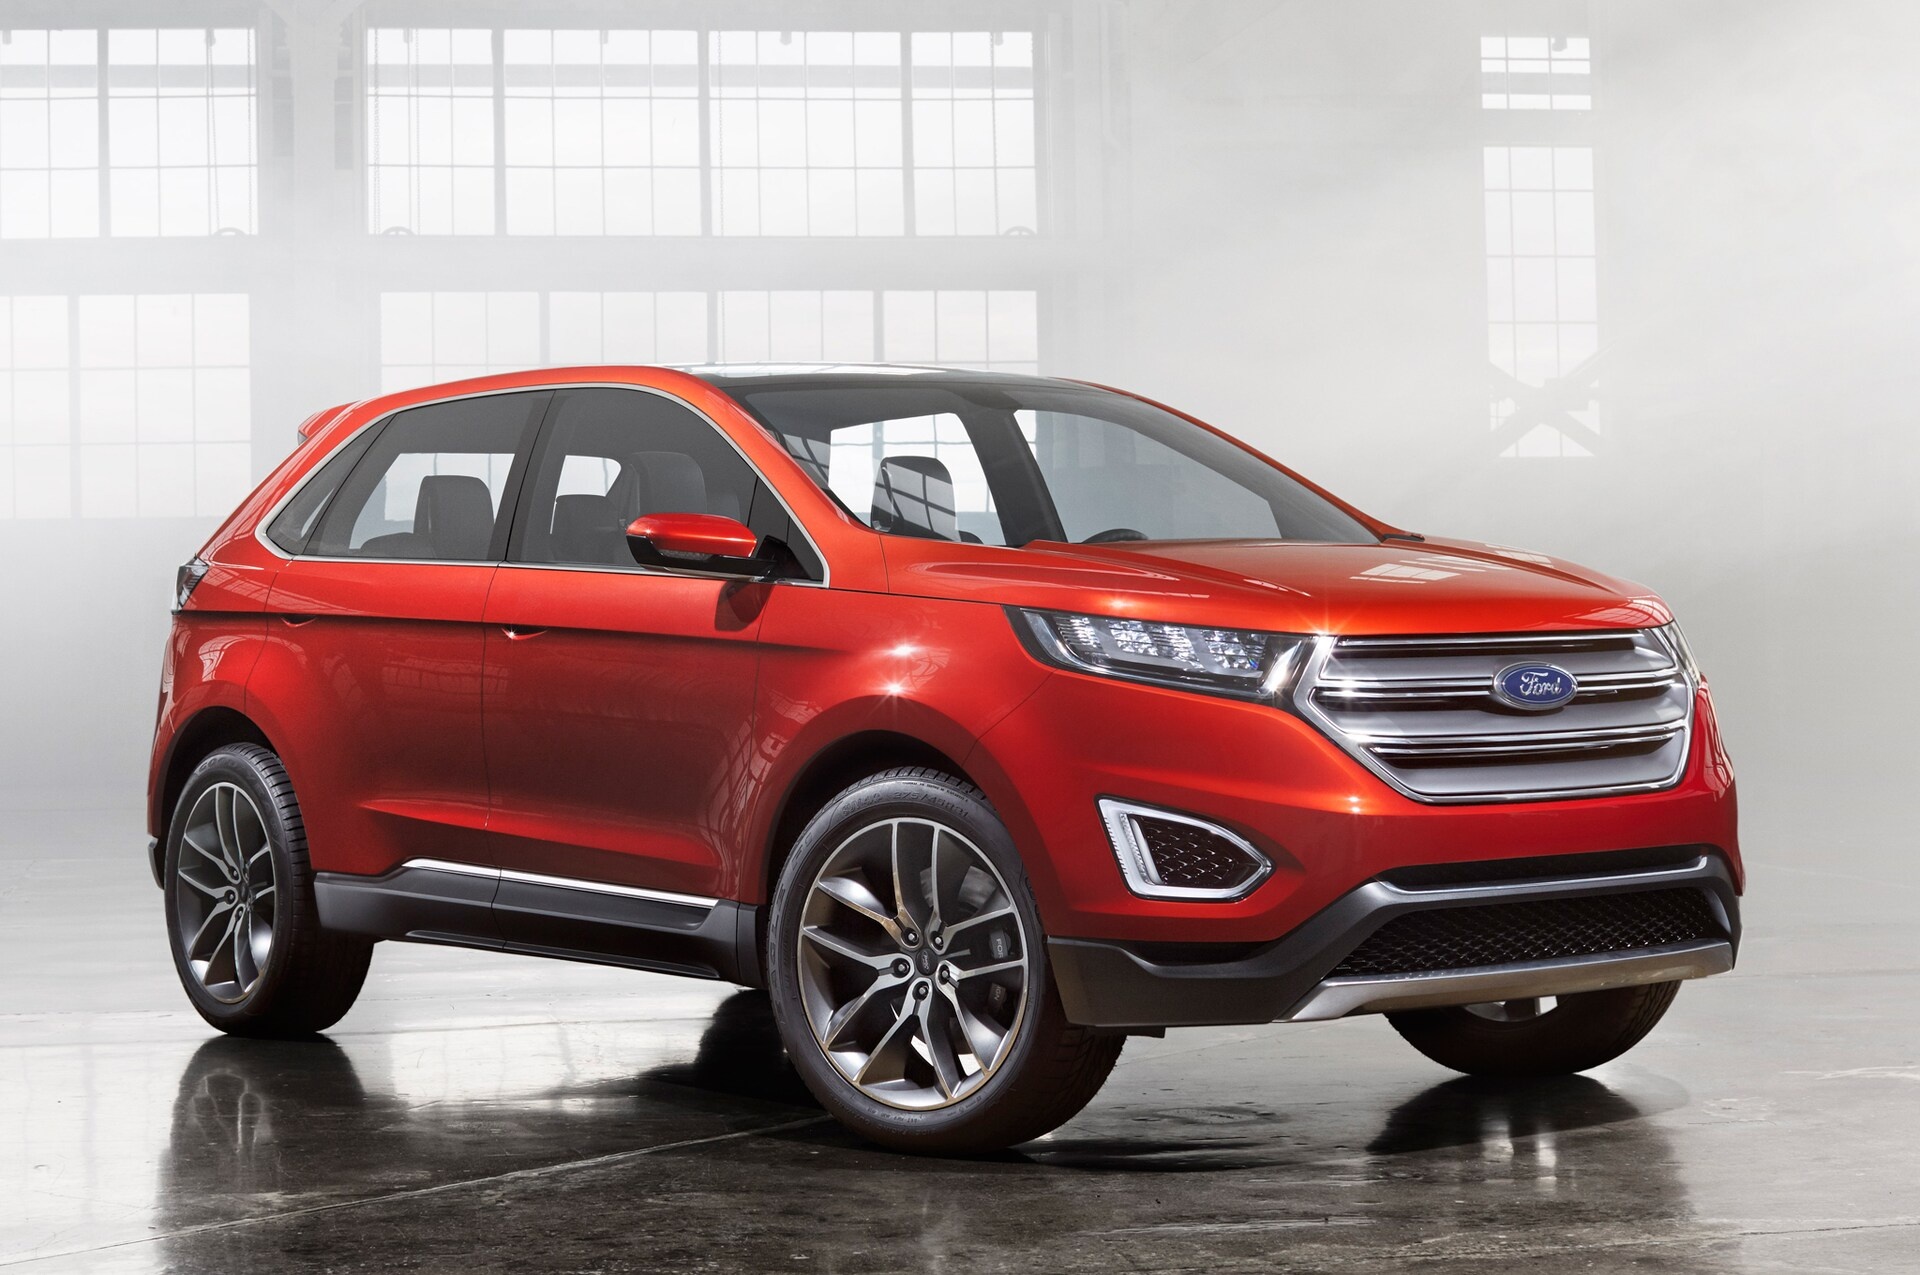 Ford Edge, Auto insights, Concept debut, First look, 1920x1280 HD Desktop